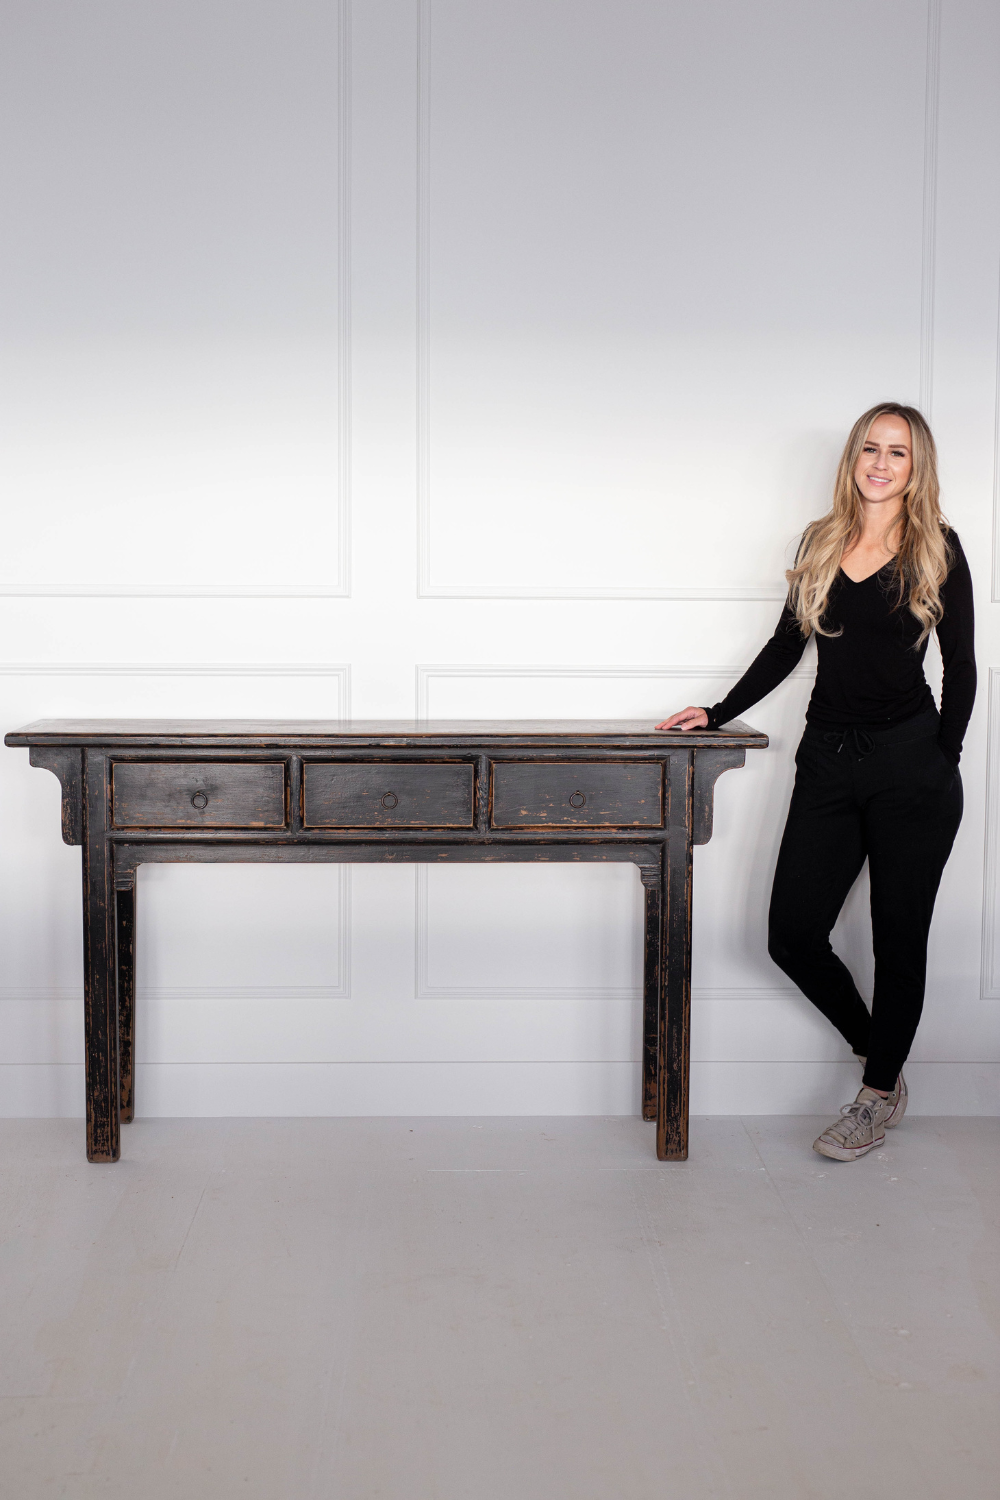 Monterey Elm Wood Console Table - Luxe B Pampas Grass  Canada , dried flowers and pampas grass Canadian Company. Bulk and wholesale dried flowers and pampas grass fluffy. Large White Pampas Grass Toronto